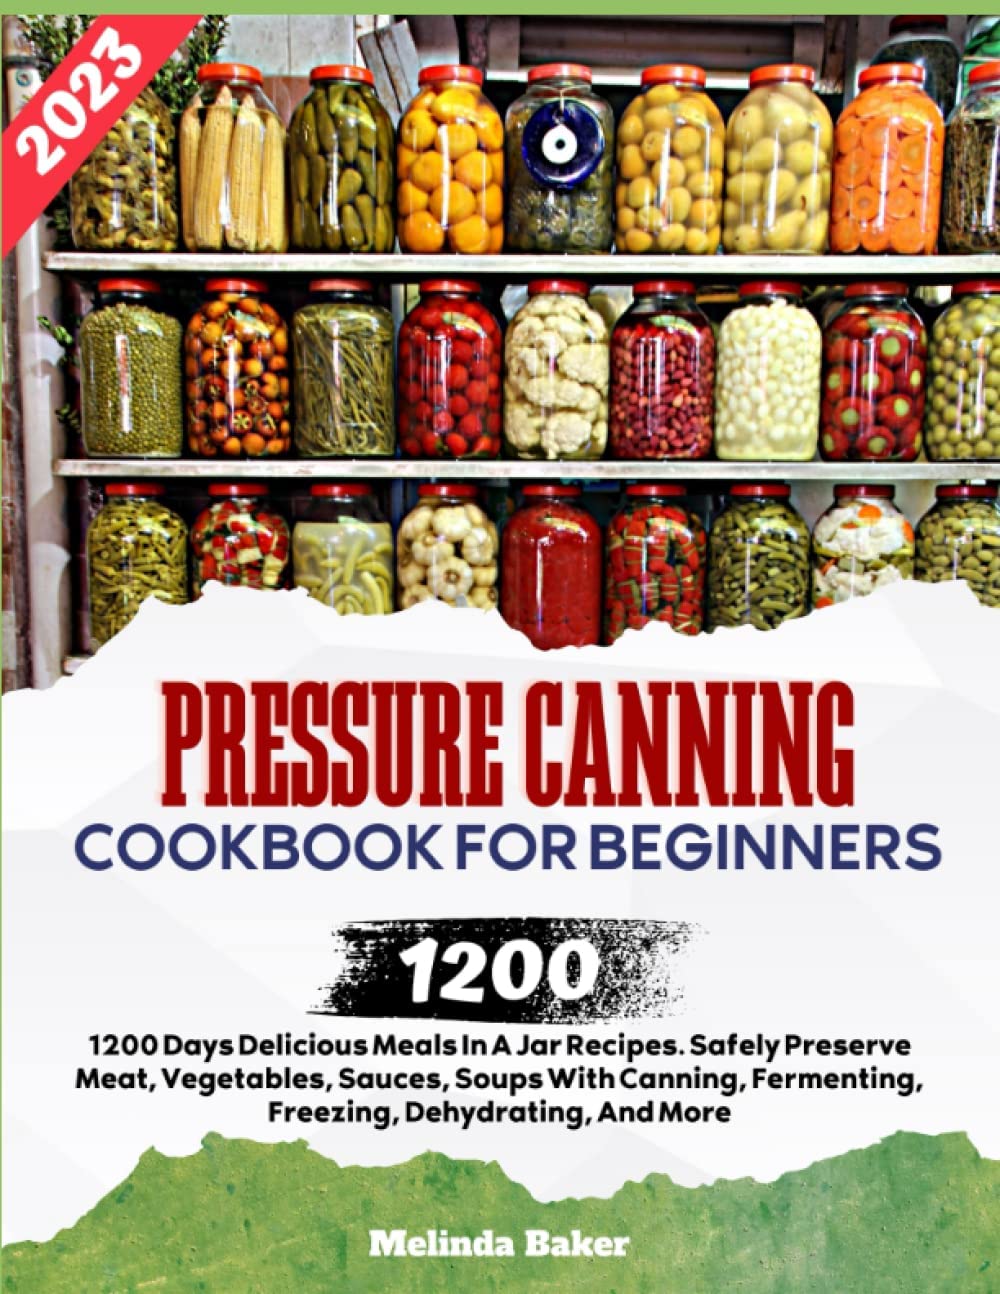 Pressure Canning Cookbook For Beginners 2023: 1200 Days Delicious Meals In A Jar Recipes. Safely Preserve Meat, Vegetables, Sauces, Soups With Canning, Fermenting, Freezing, Dehydrating, And More.